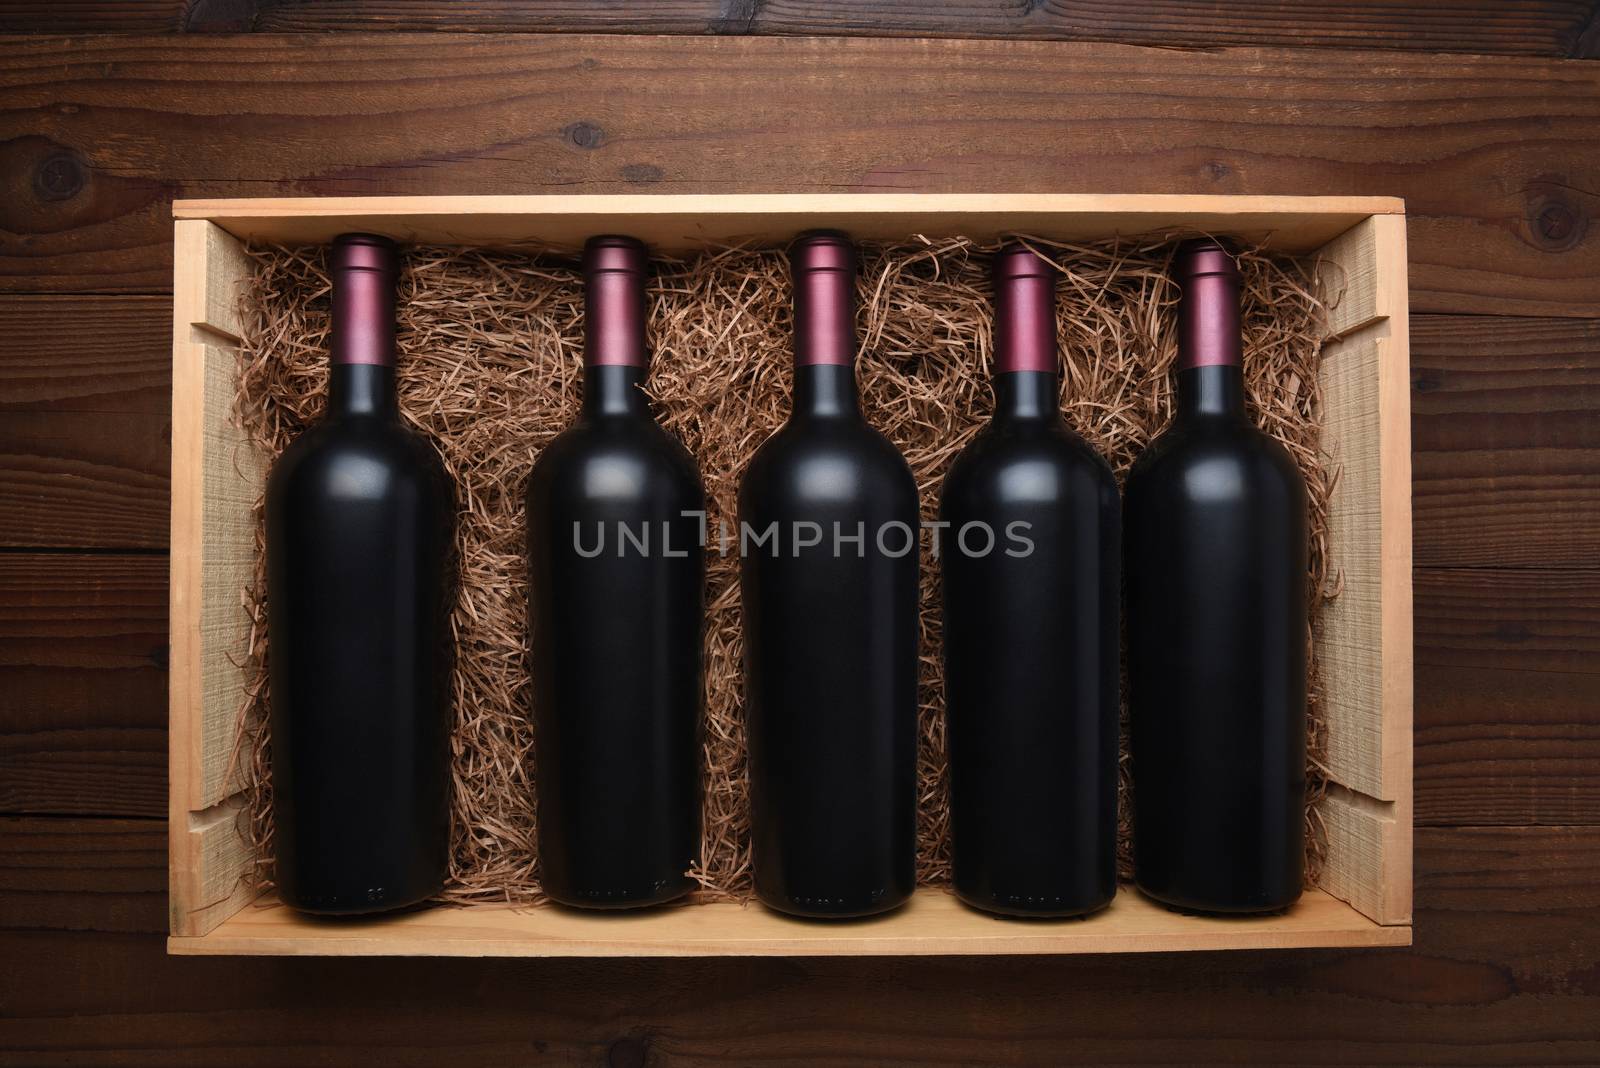 Case of Red Wine: Top view of a wood case of red wine bottles on a dark wood table, the case is filled with packing straw.